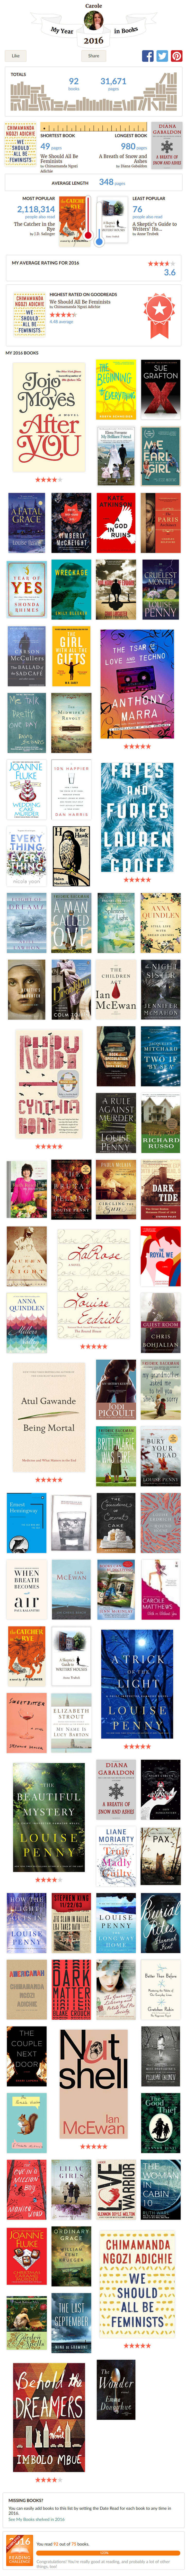 goodreads_2016_year_in_books